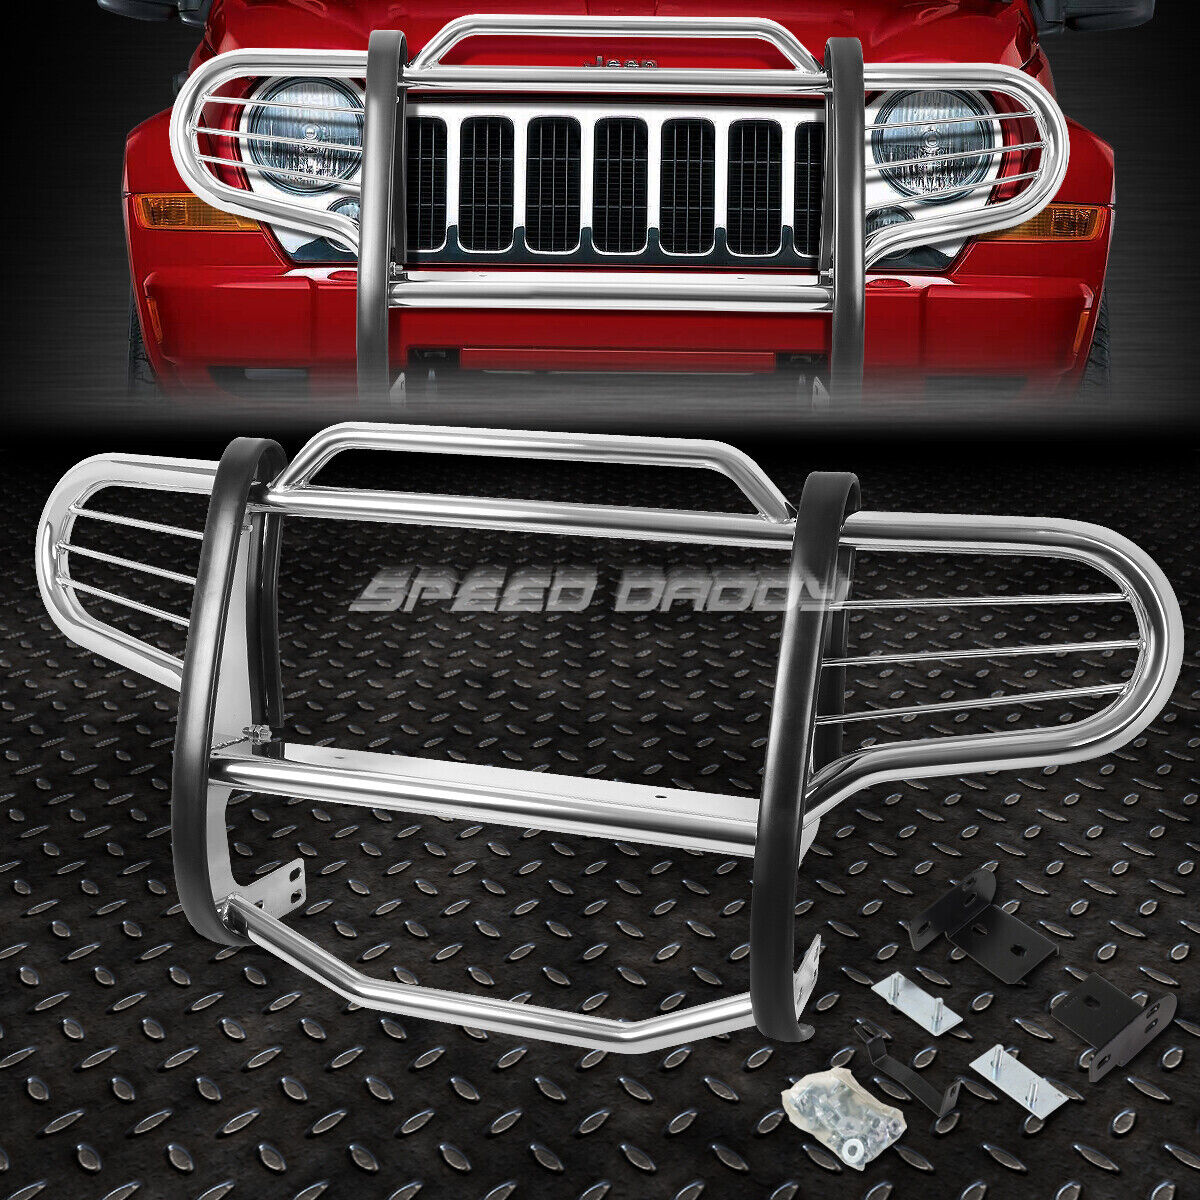 FOR 02-07 JEEP LIBERTY KJ SUV CHROME STAINLESS STEEL FRONT BUMPER GRILL GUARD